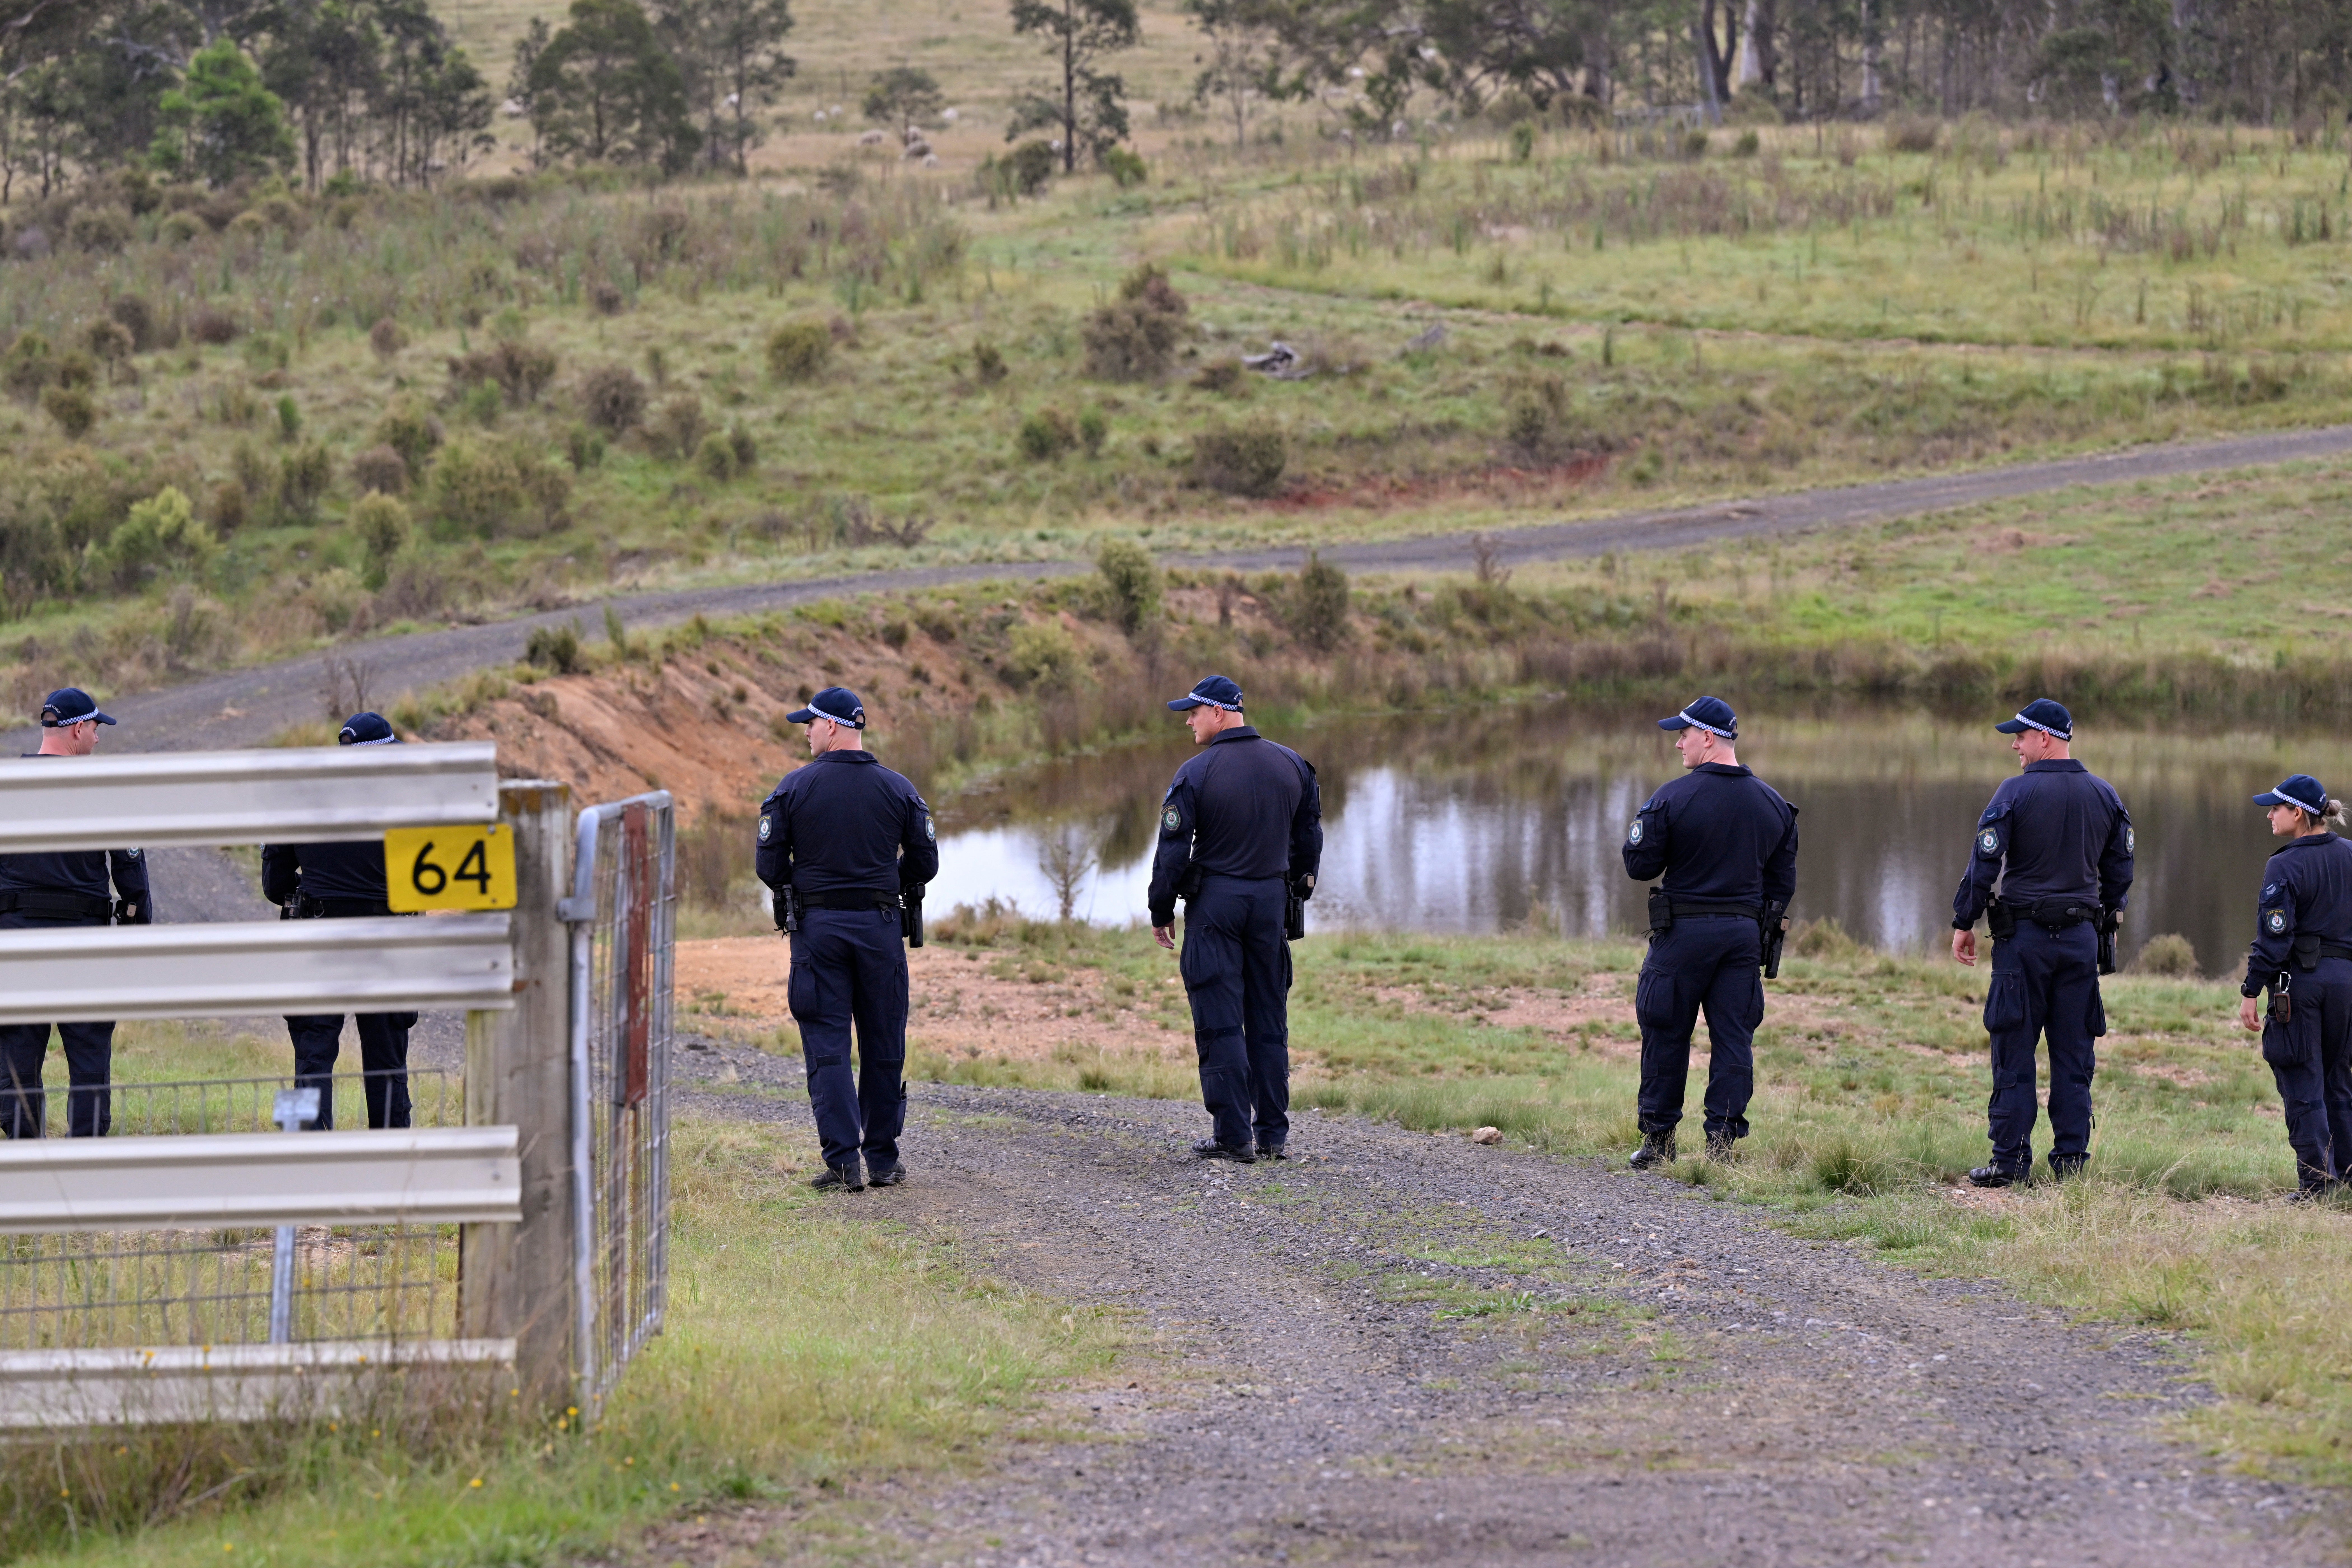 Police conduct a line search near a body of water on a rural property near Bungonia